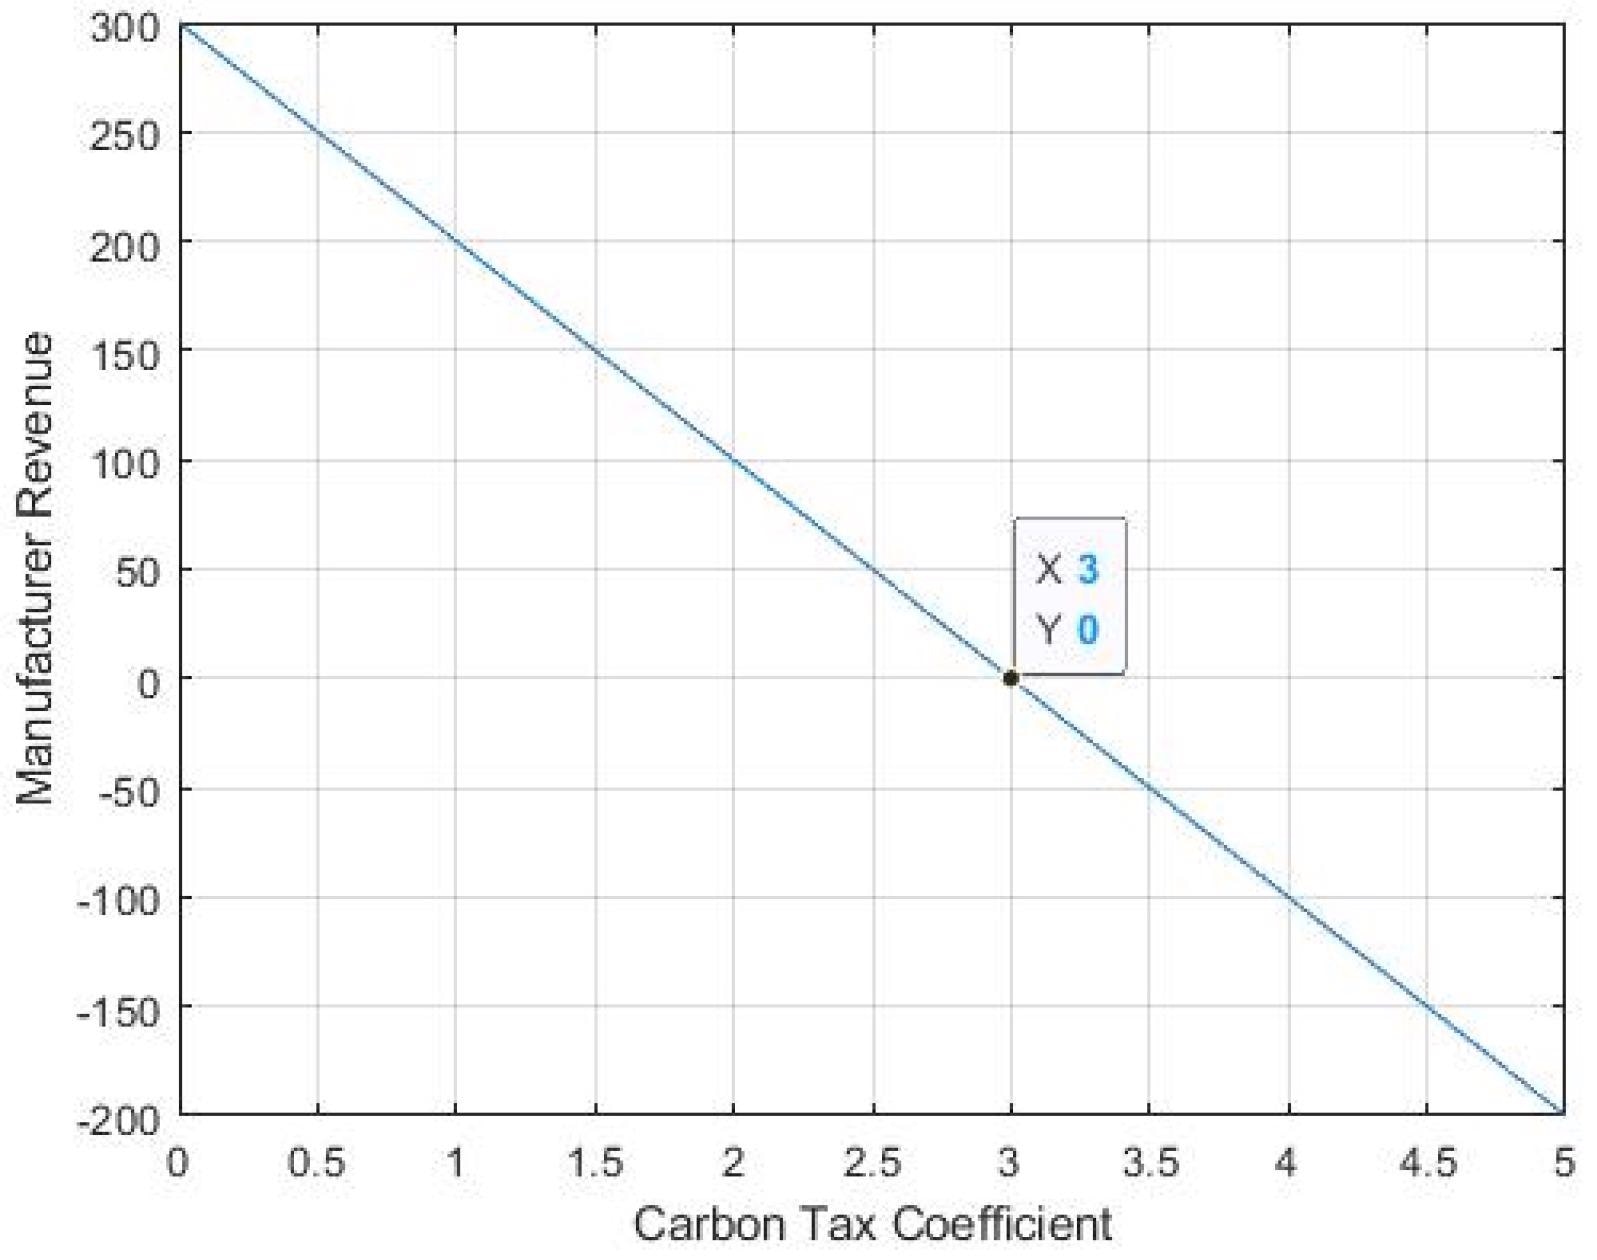 The effect of the carbon tax coefficient on manufacturer earnings.